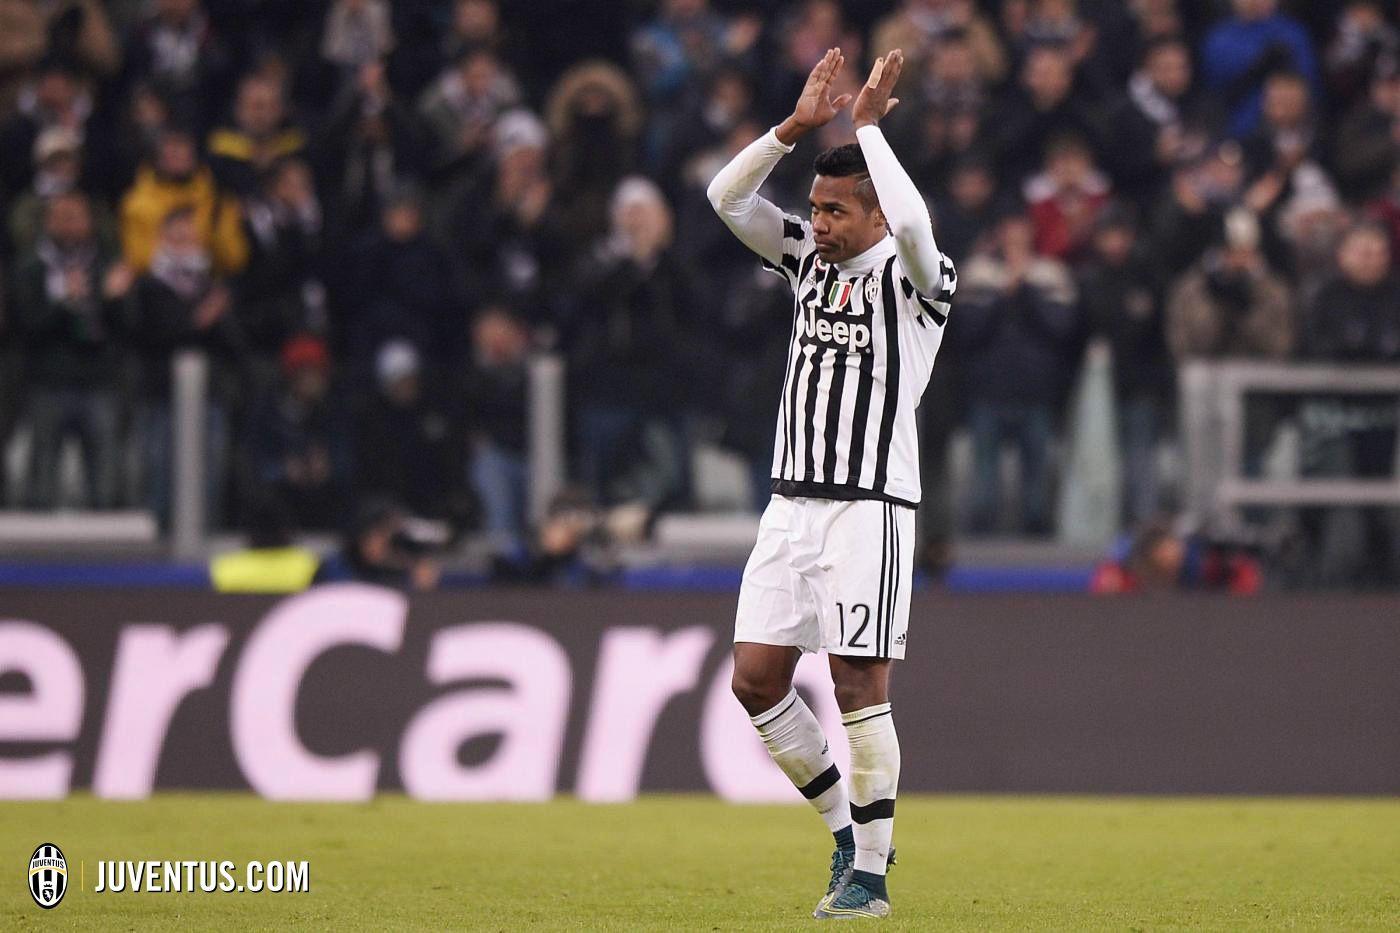 Belief growing for assist king Alex Sandro